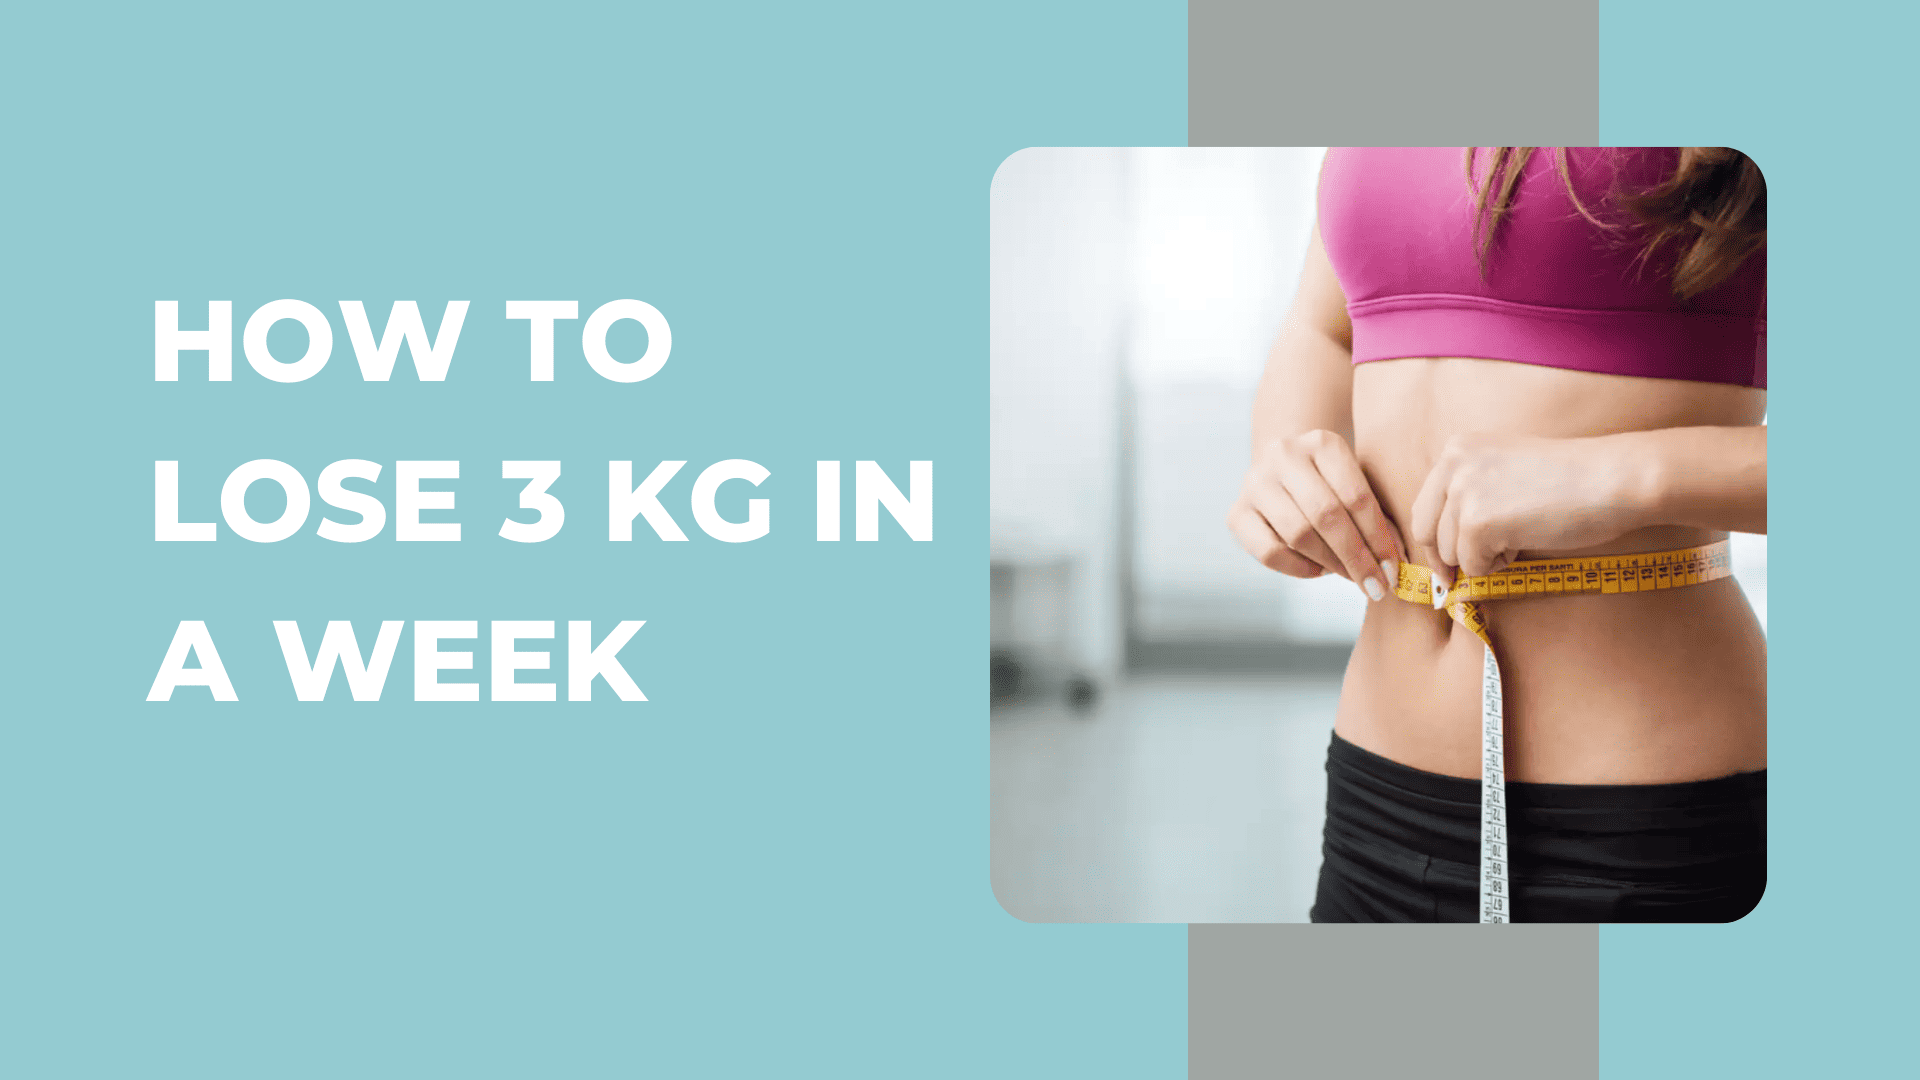 How to Lose 3 Kg in a Week - Diet Plan and Tips